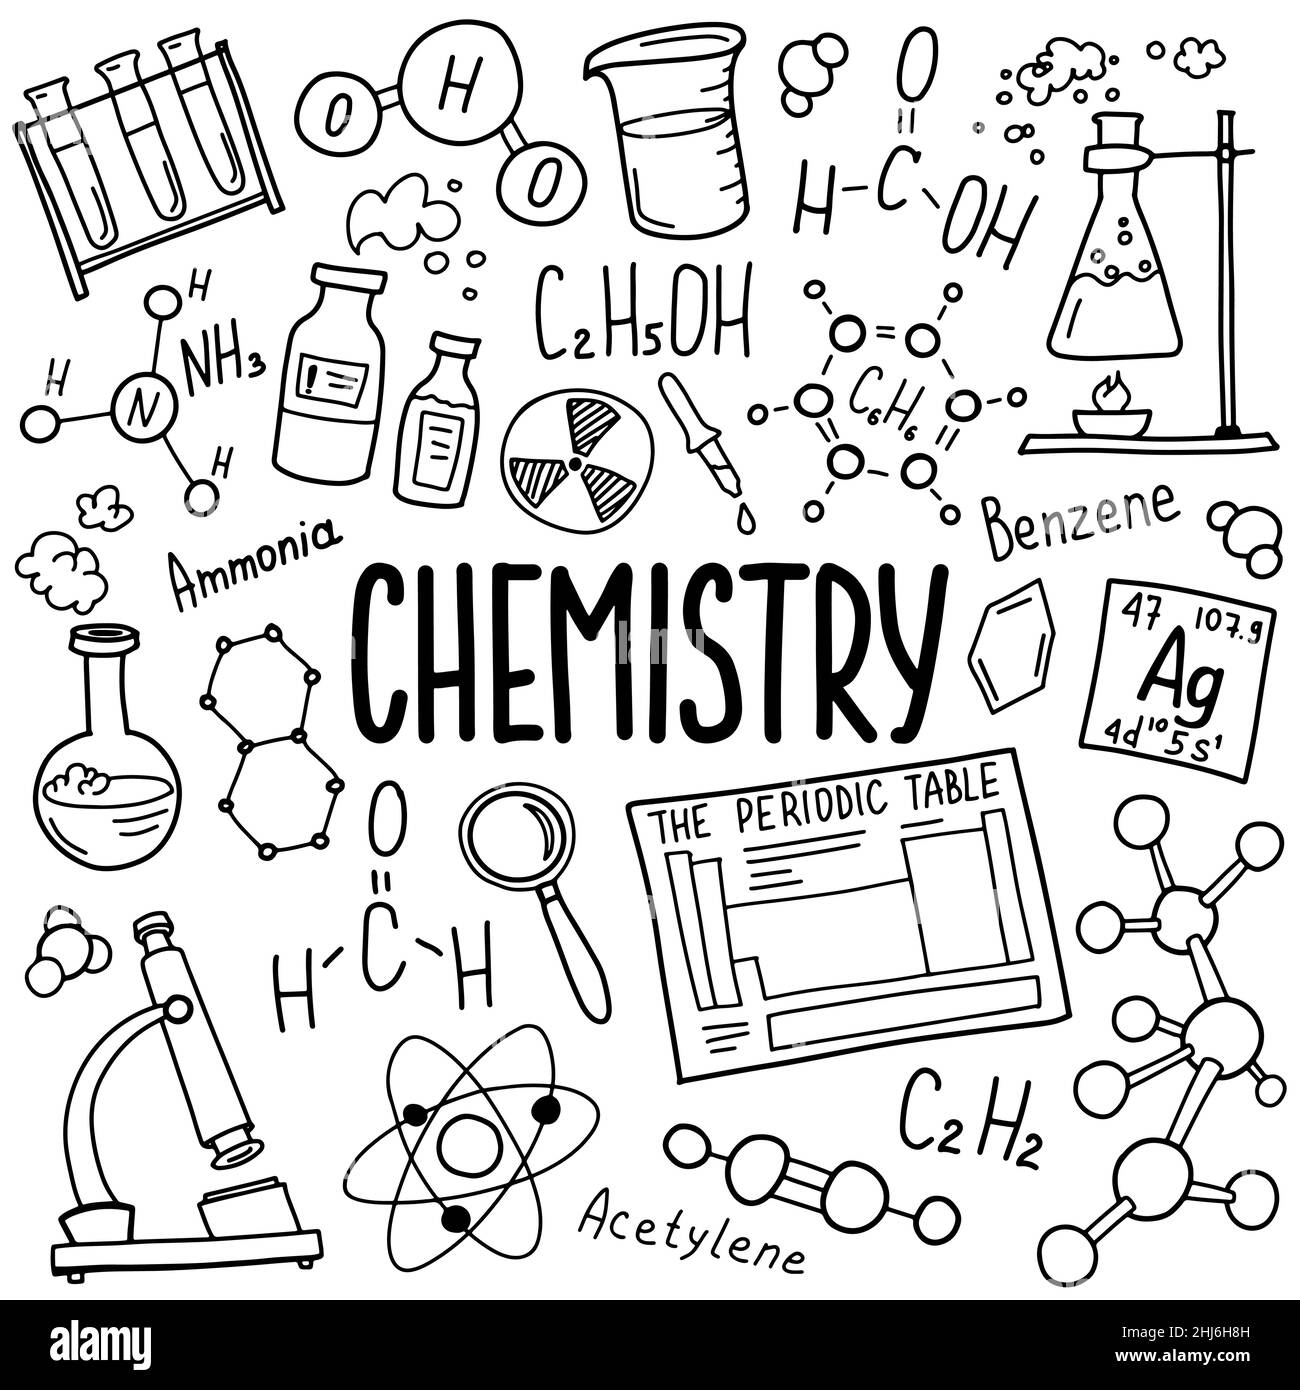 Chemistry symbols icon set. Science subject doodle design. Education and study concept. Back to school sketchy background for notebook, not pad Stock Vector